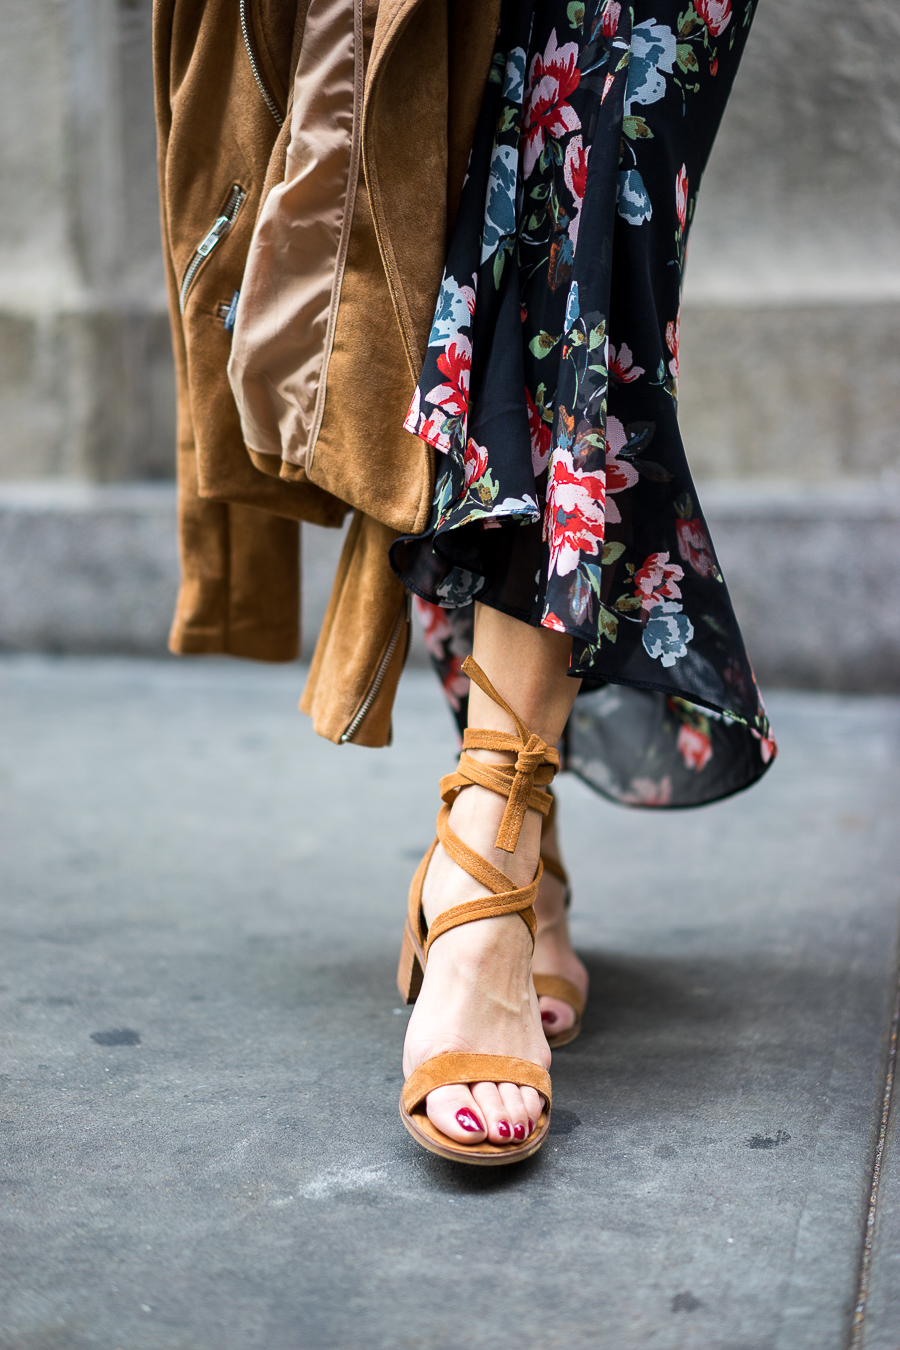 a-glam-lifestyle-blogger, zara-floral-maxi-dress, steve-madden-lace-up-sandals, tan-suede-jacket, new-york-fashion-week-outfit